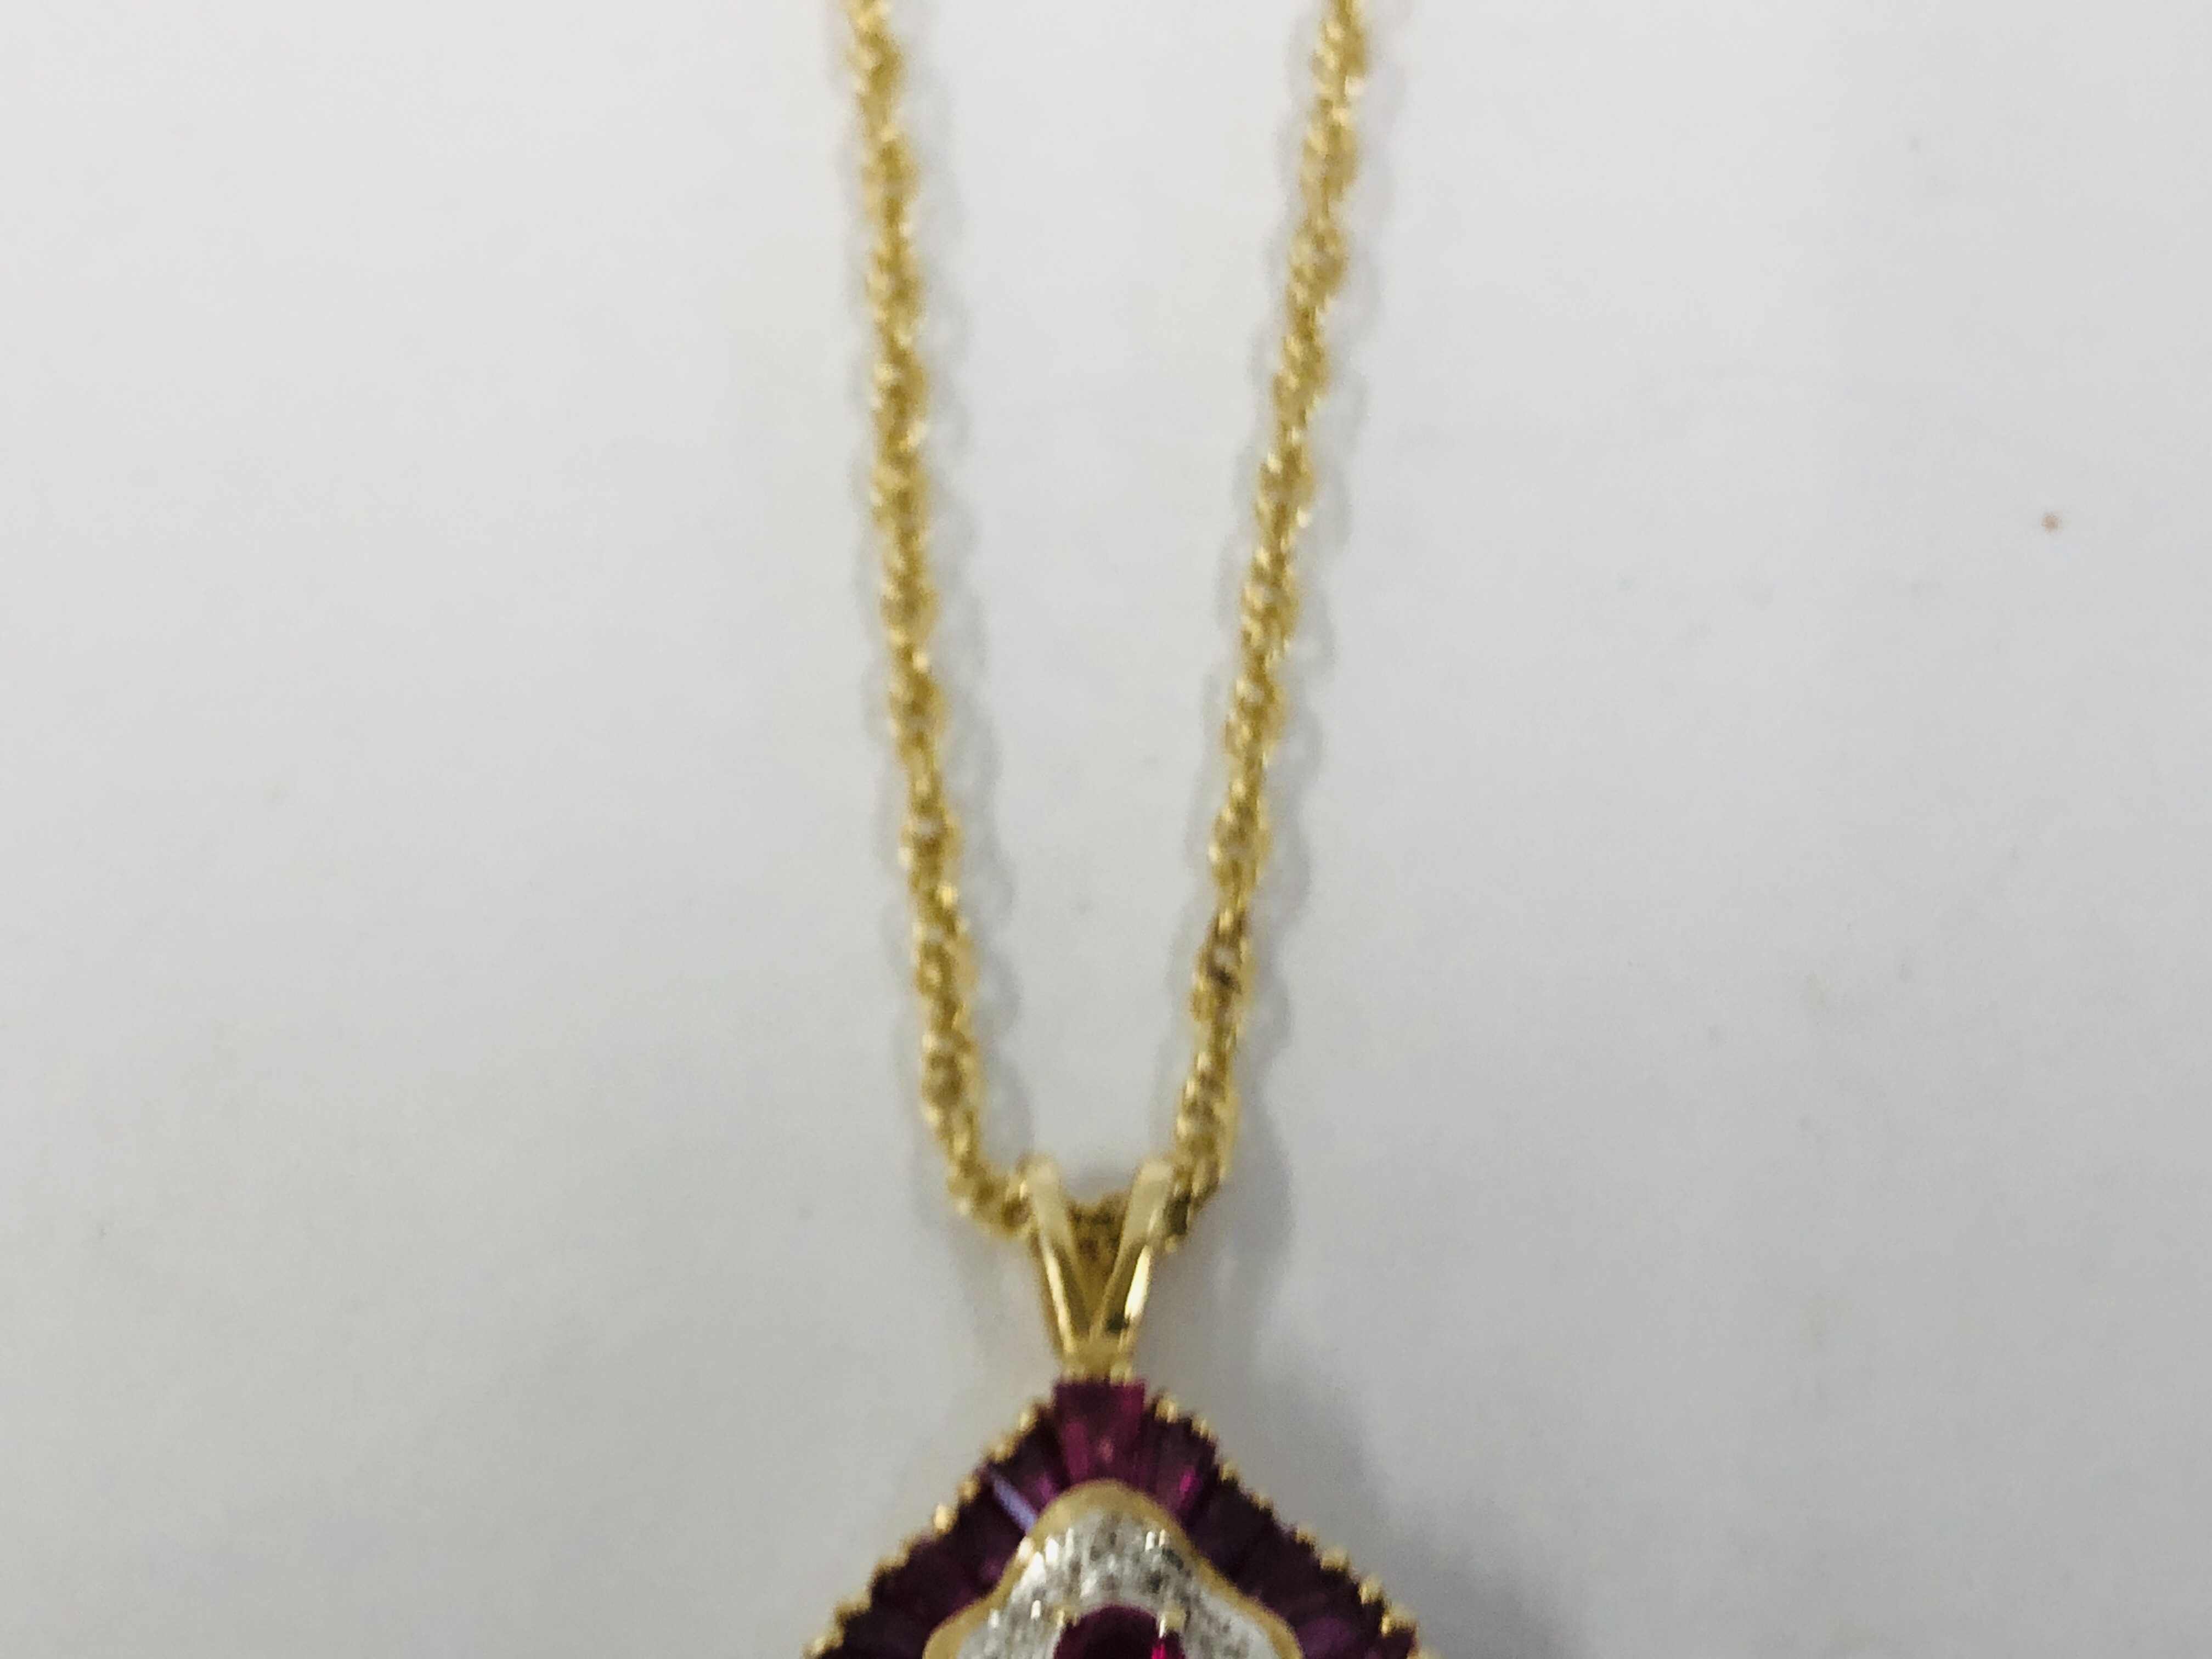 AN ORNATE PENDANT SET WITH MAINLY PINK STONE ON A FINE INTERTWINED 9CT GOLD CHAIN. - Image 6 of 12